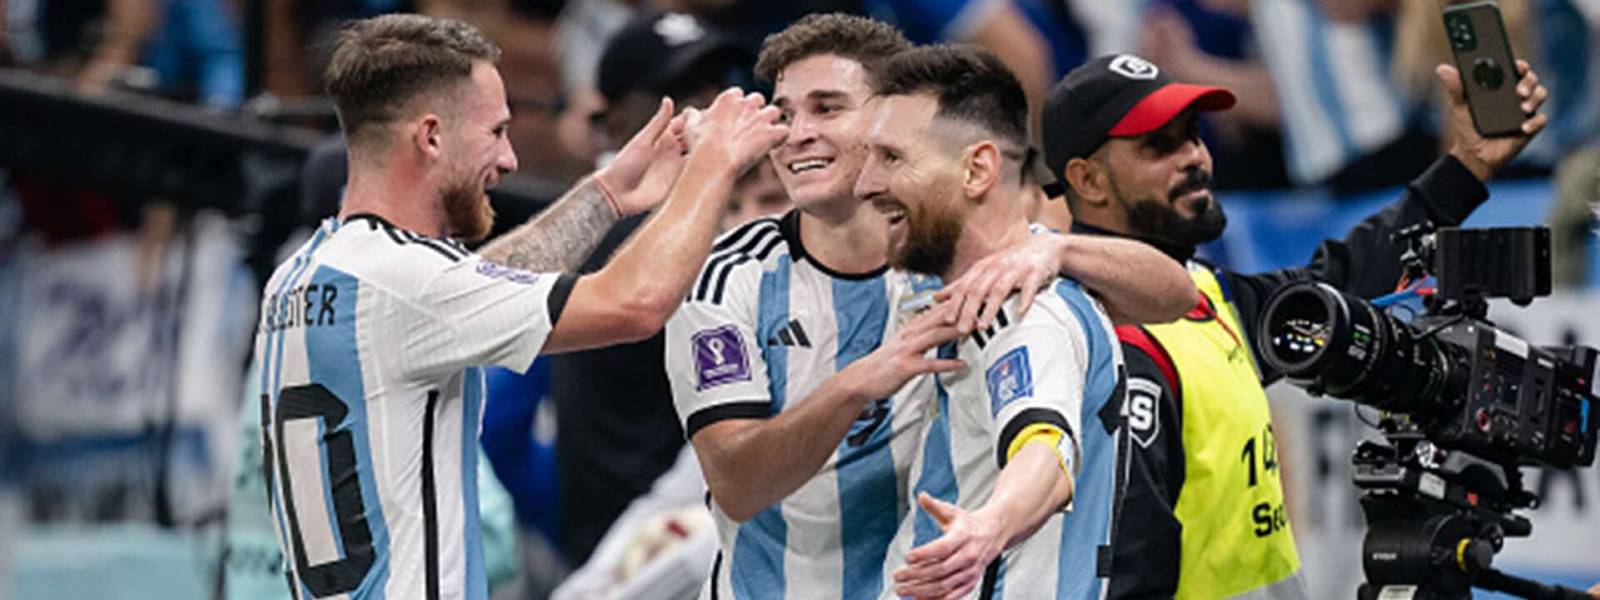 Argentina into FIFA World Cup Final